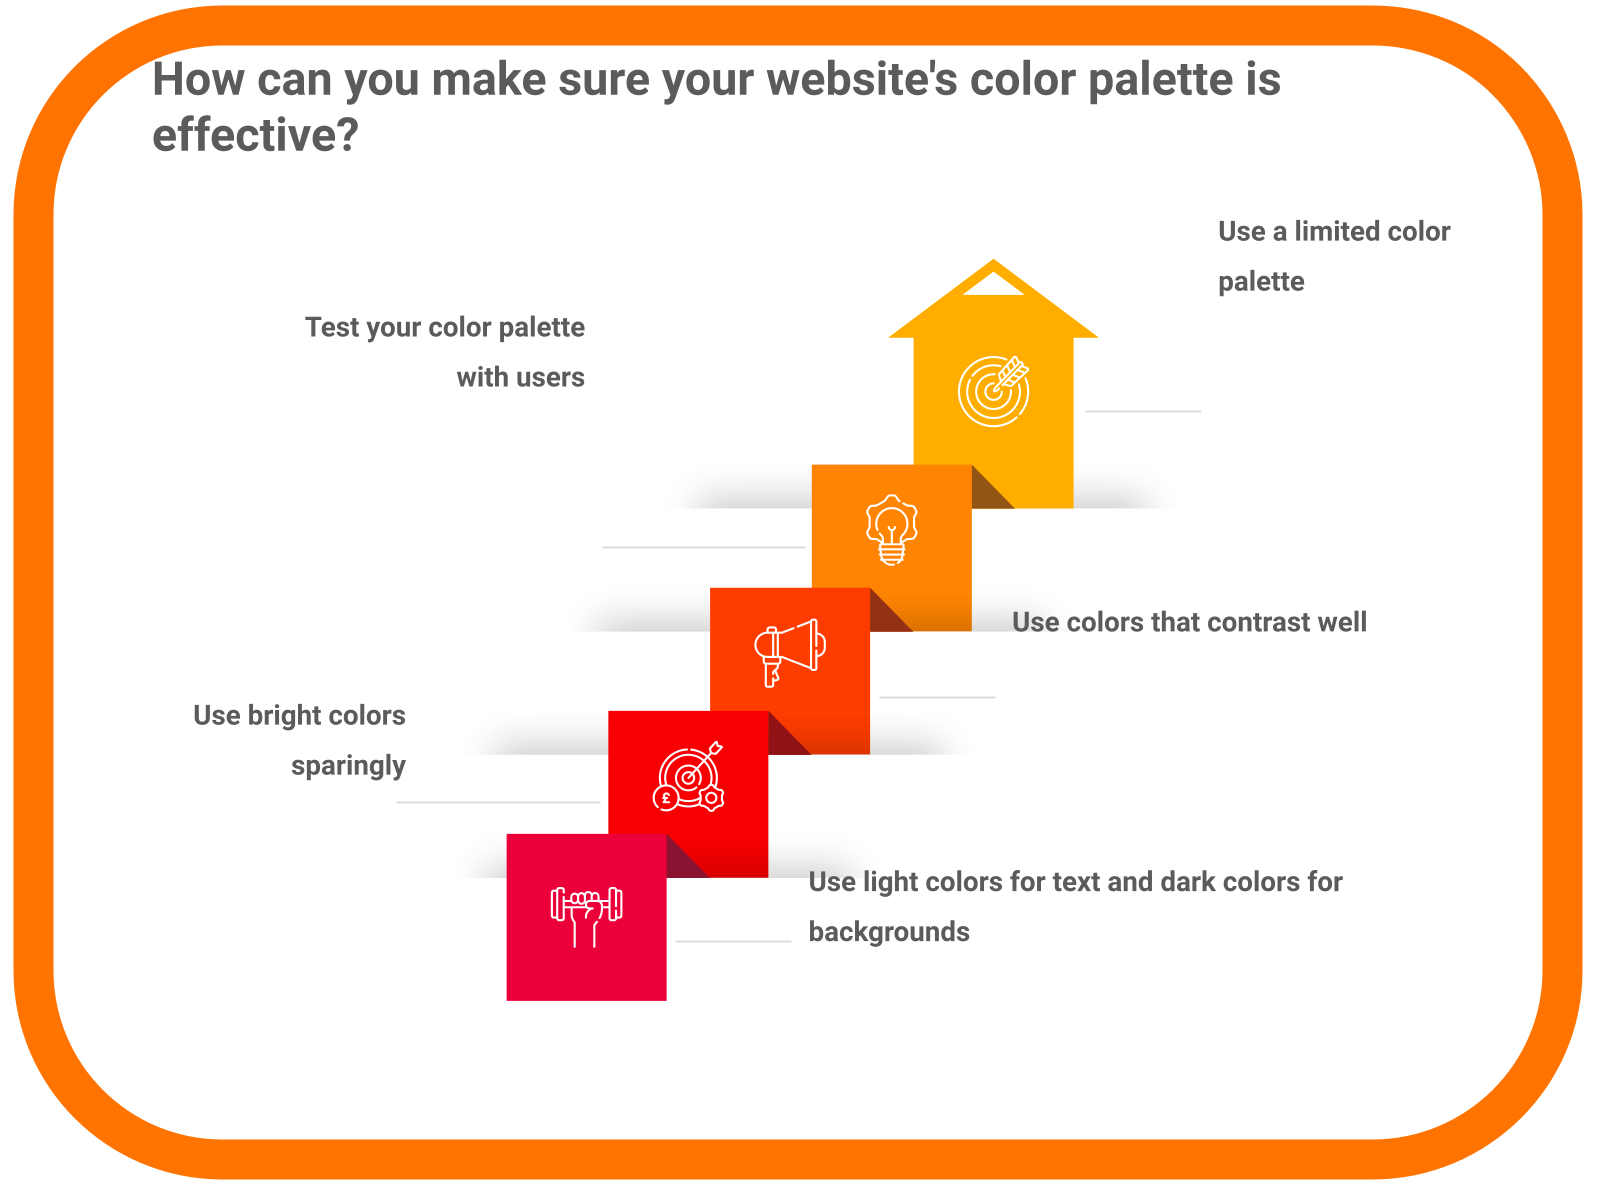 How can you make sure your website’s color palette is effective?